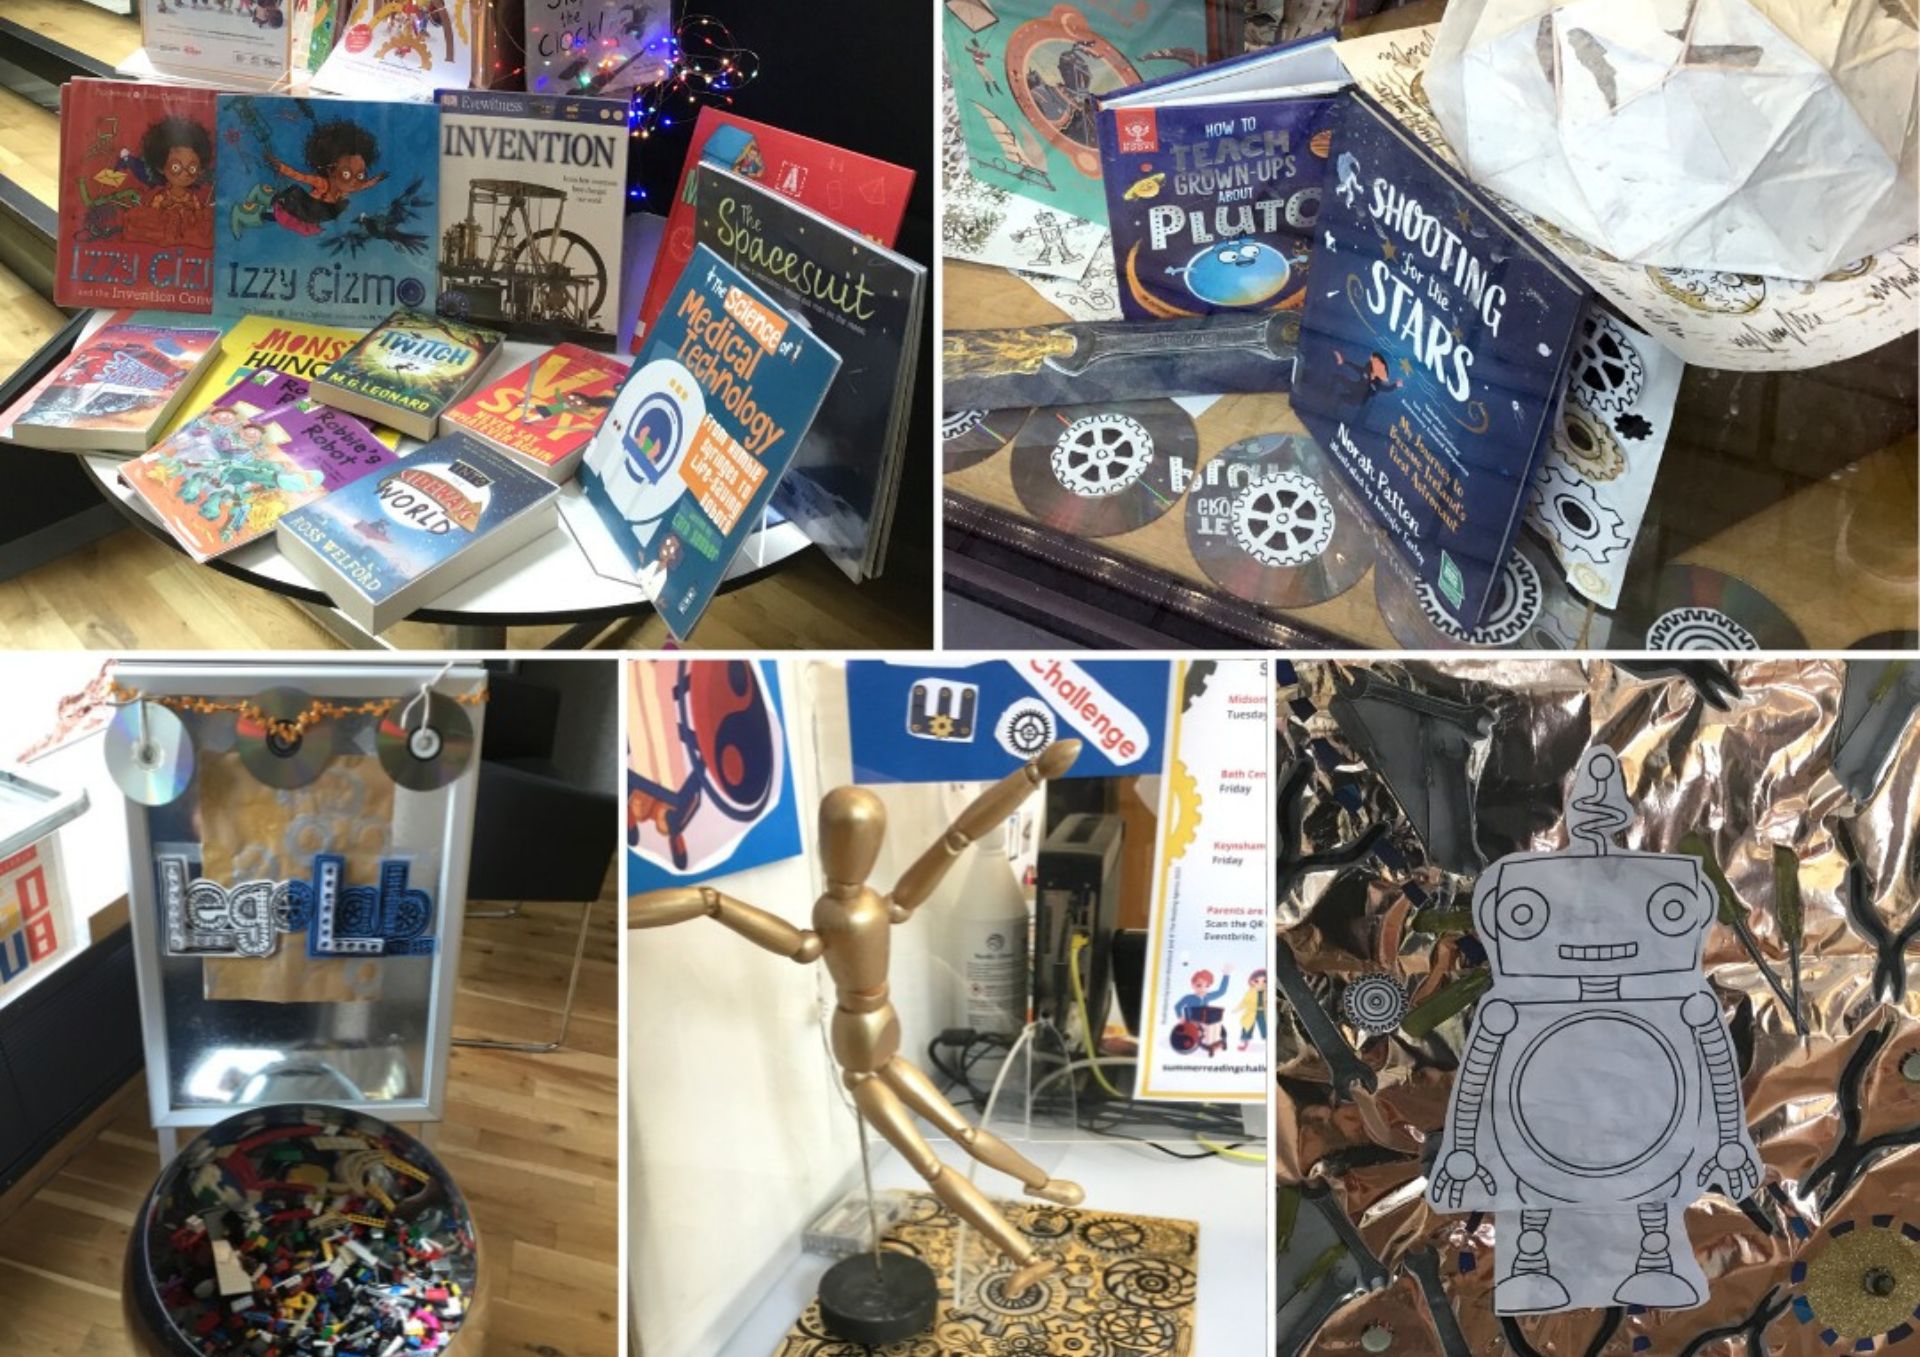 Photos of books, a paper cut out of a robot and displays related to the challenge theme